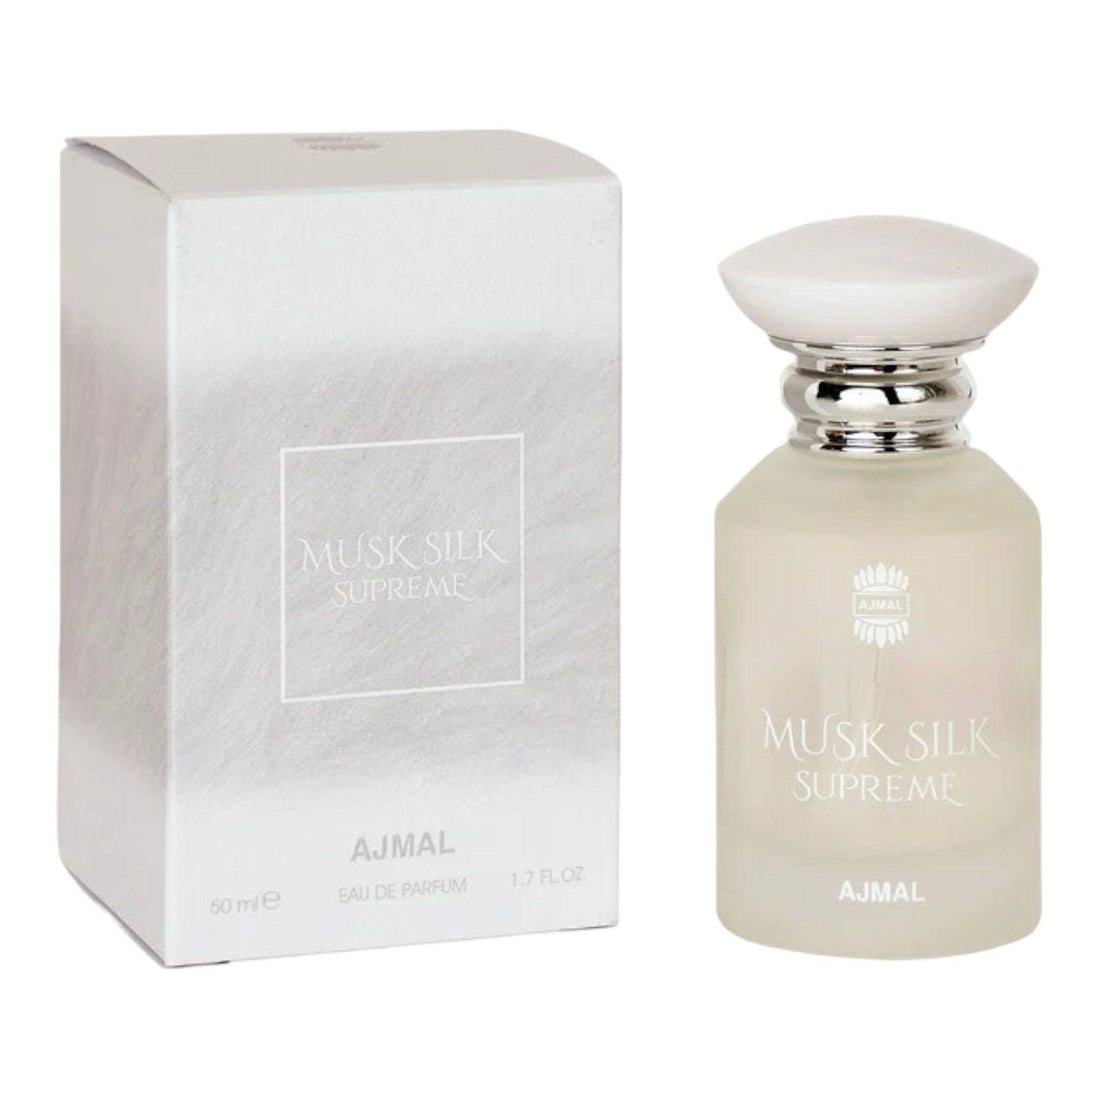 50ml bottle of Ajmal Musk Silk Supreme Eau de Parfum, boasting a unique combination of musky, silky, floral and amber notes.